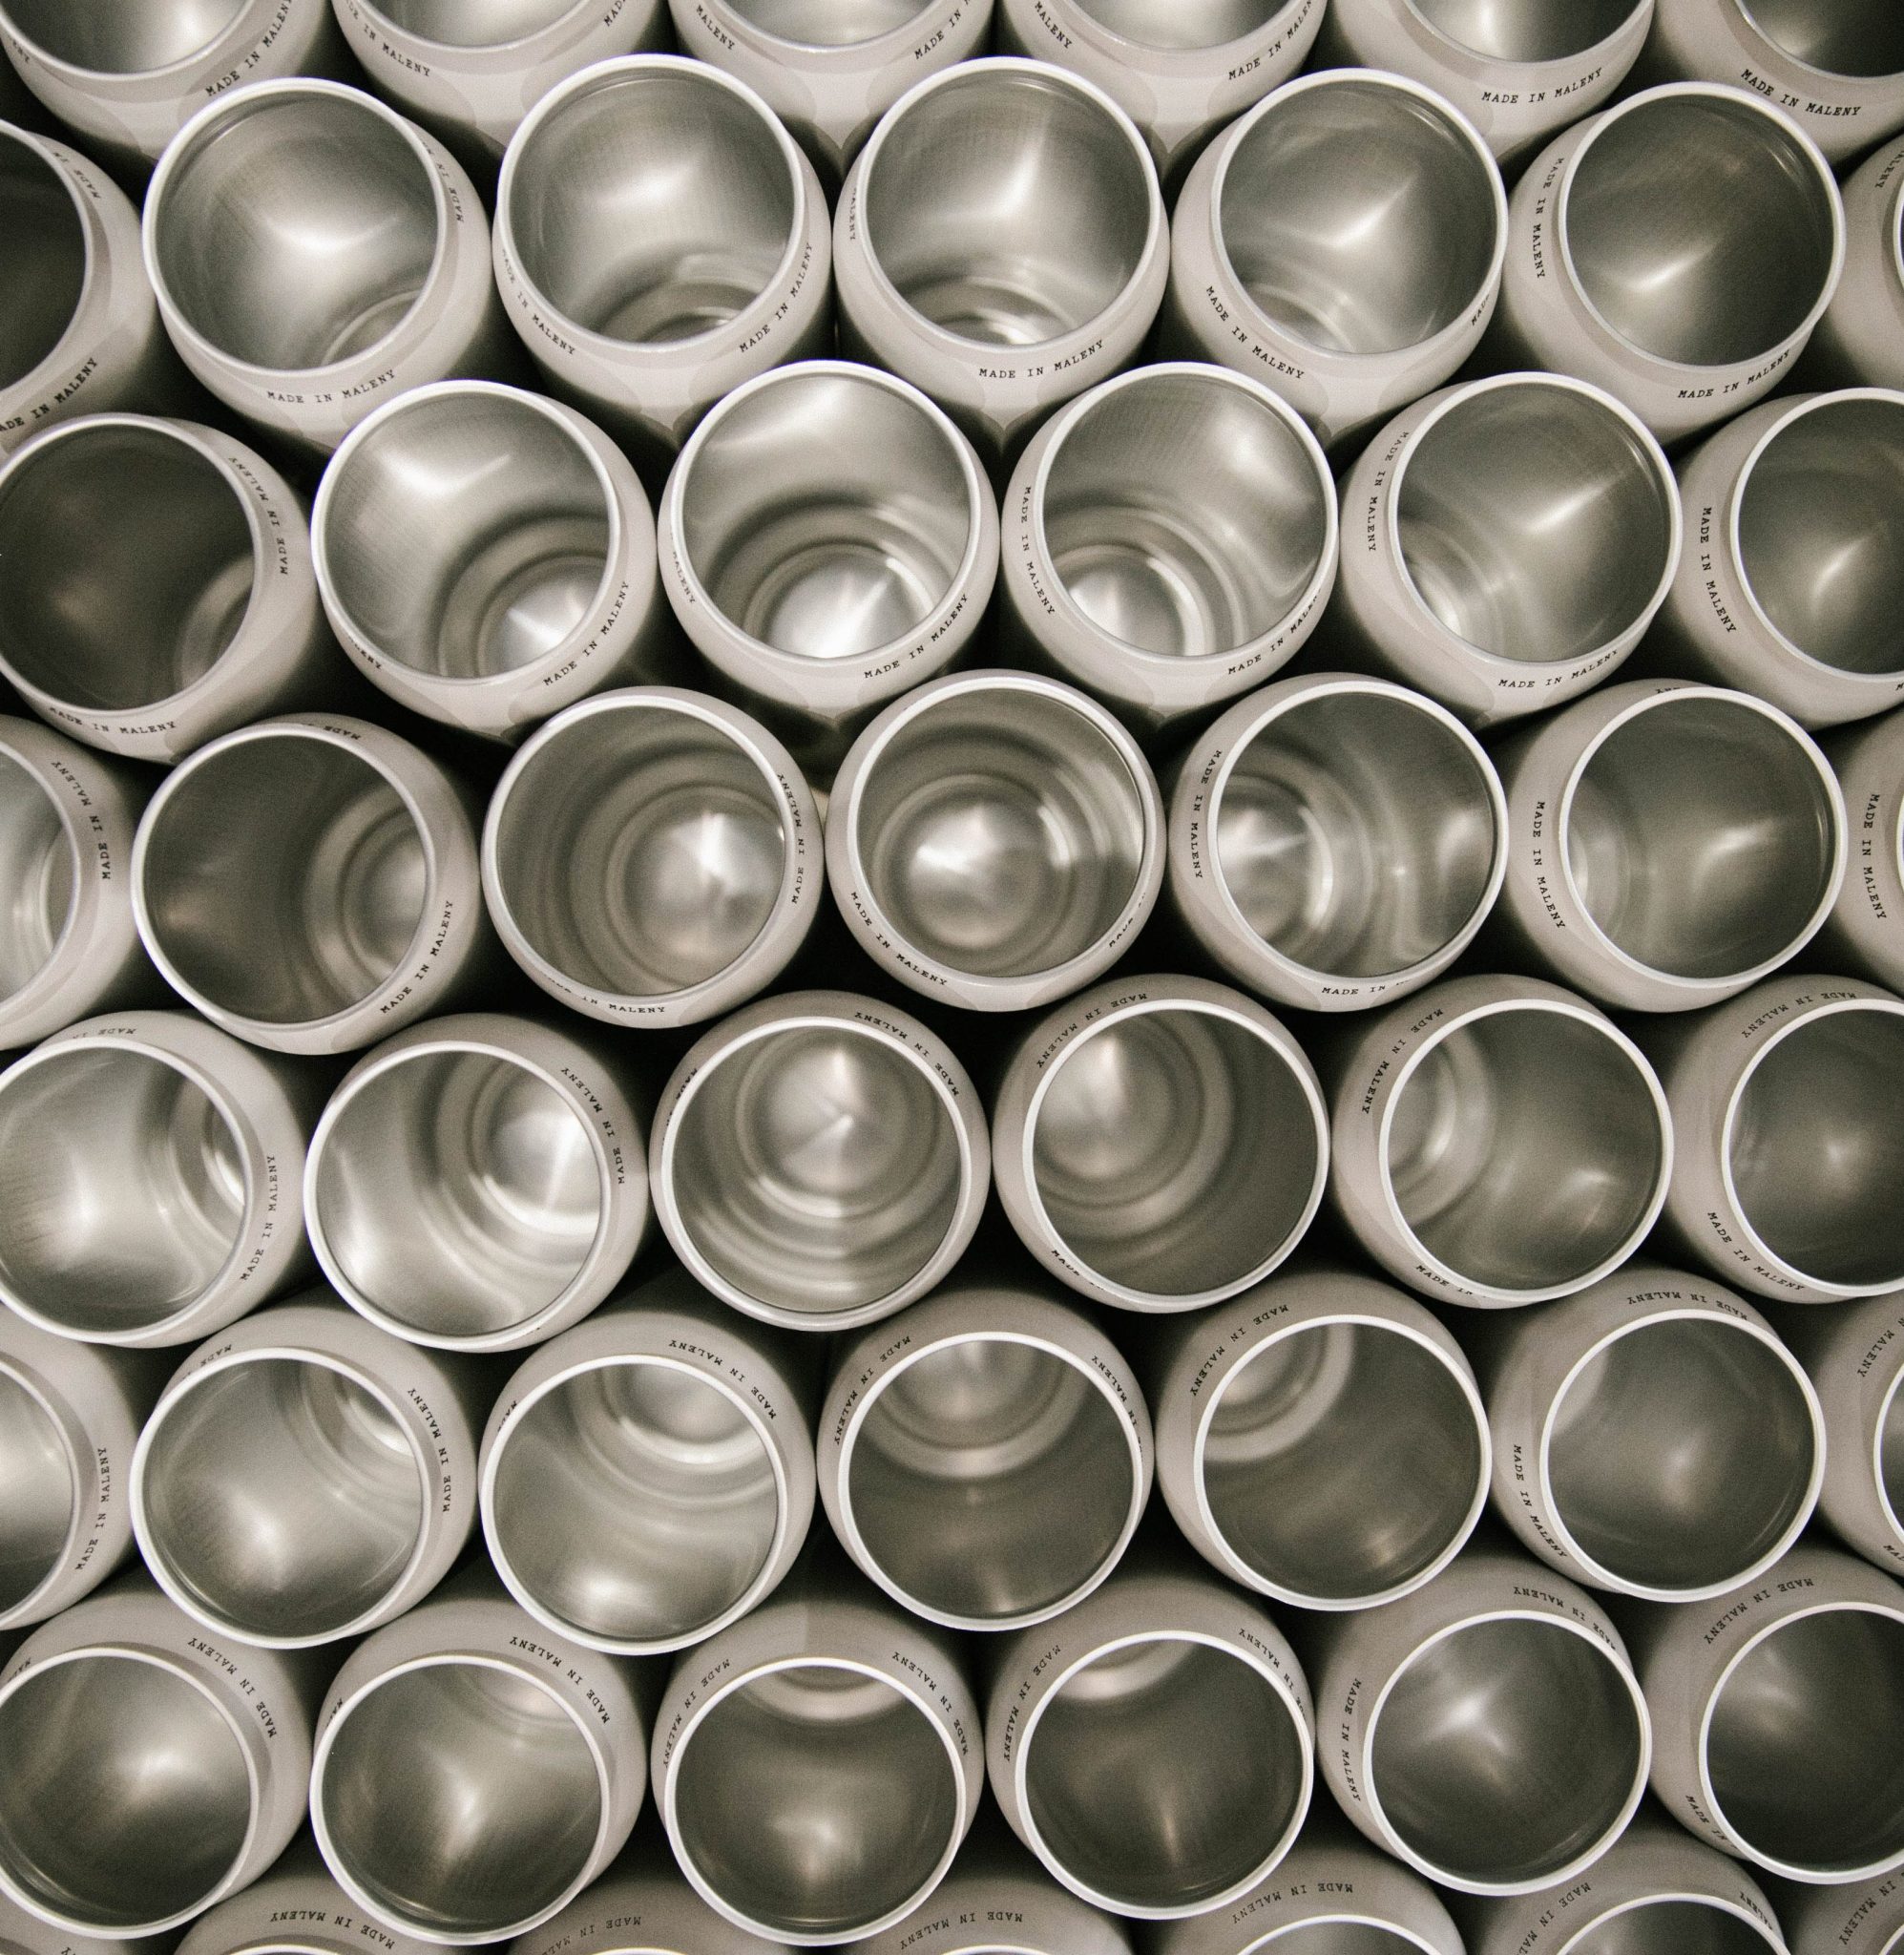 WHY IS THE CRAFT BEER INDUSTRY MOVING TO CANNED BEER?